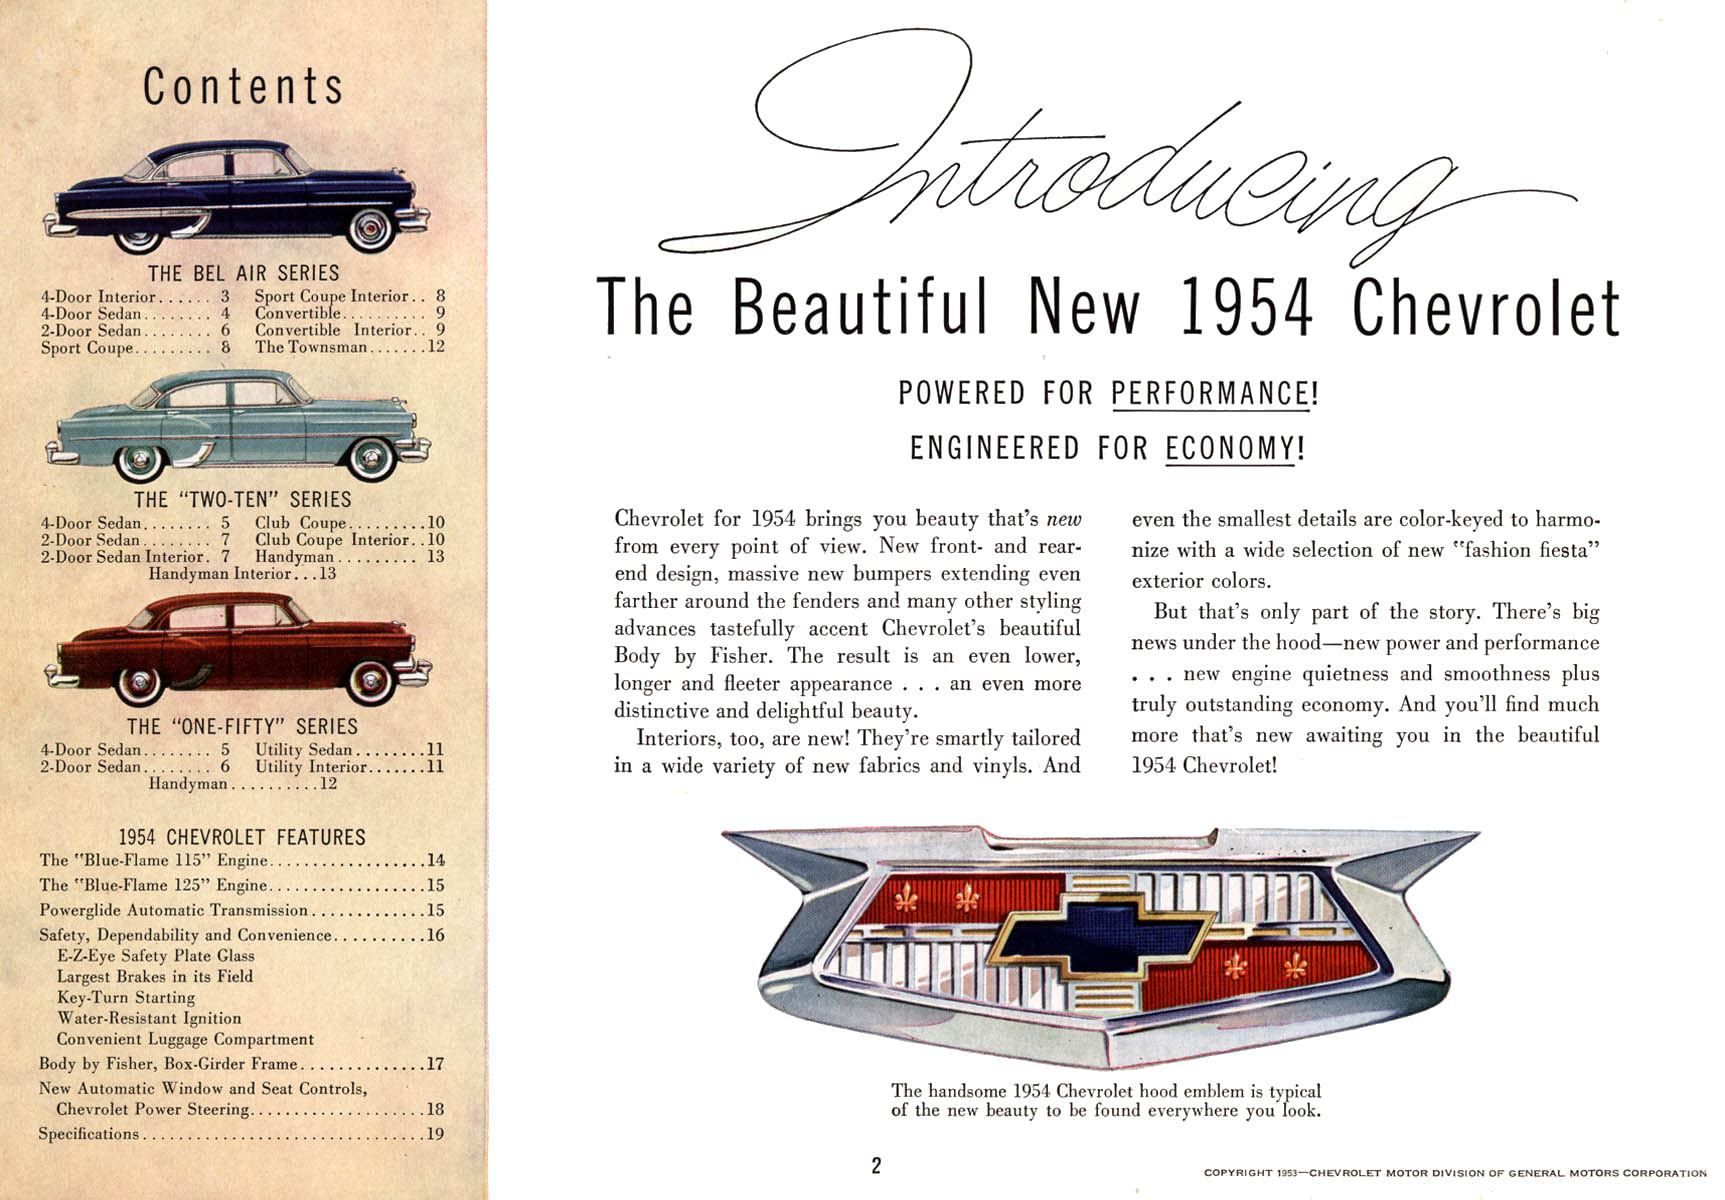 1954 Chevrolet Brochure Page 2